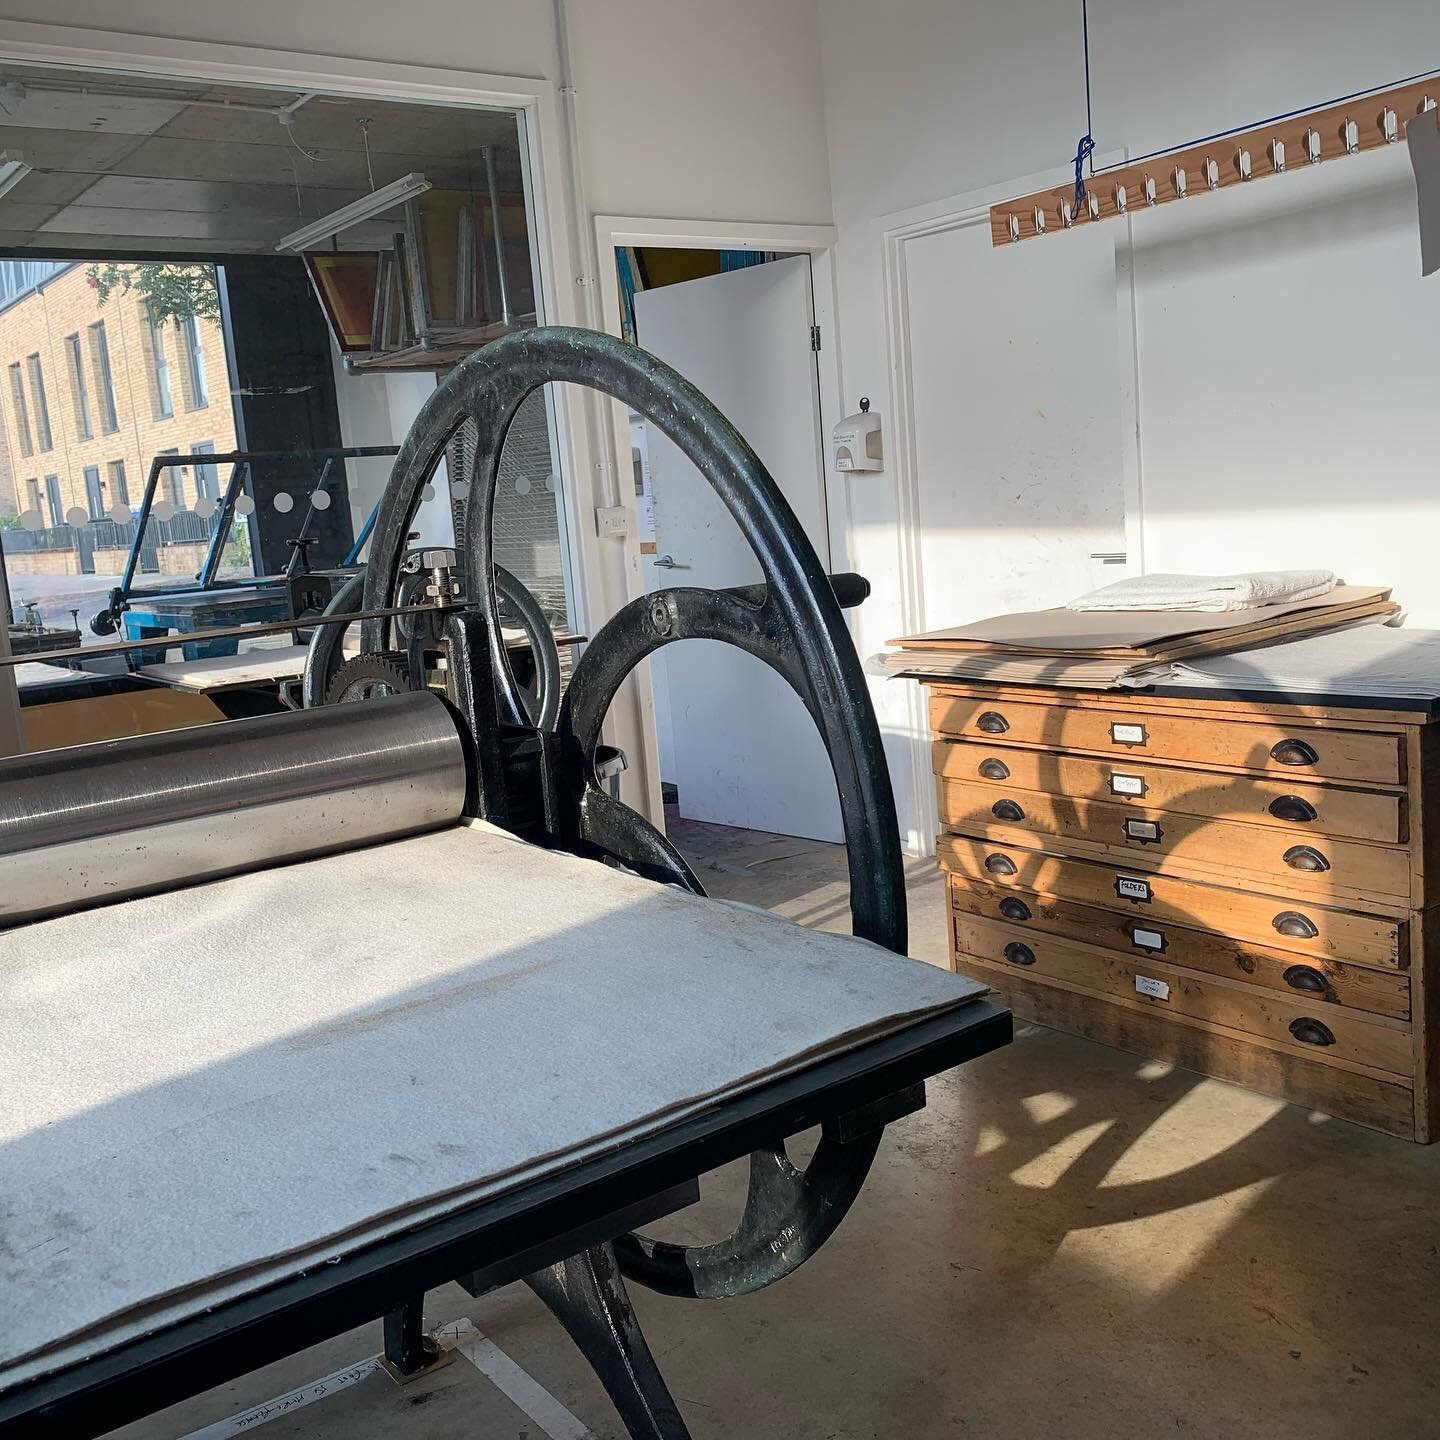 Looking for somewhere to print&hellip;.. enjoy the evening sun in our #westcroydon studio with our open access memberships:) ☀️☀️☀️

**Open 7 days a week for members ** 
Perfect for #screenprinting #textileprinting
#intaglioprint #etching #woodcut #l